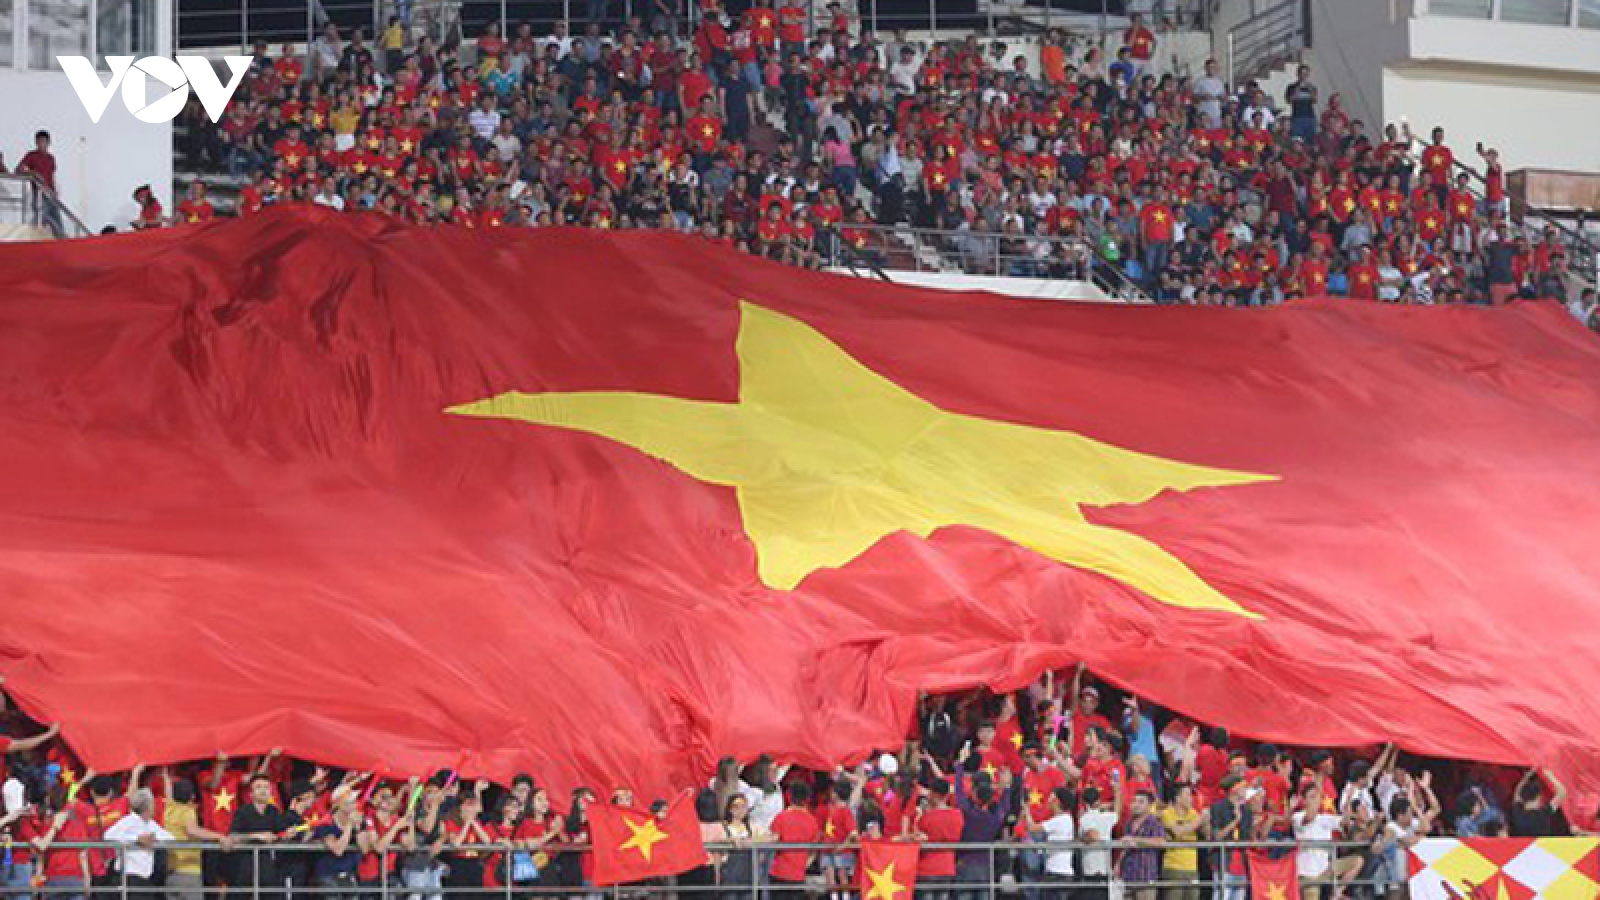 Fans permitted to support national team at World Cup qualifiers